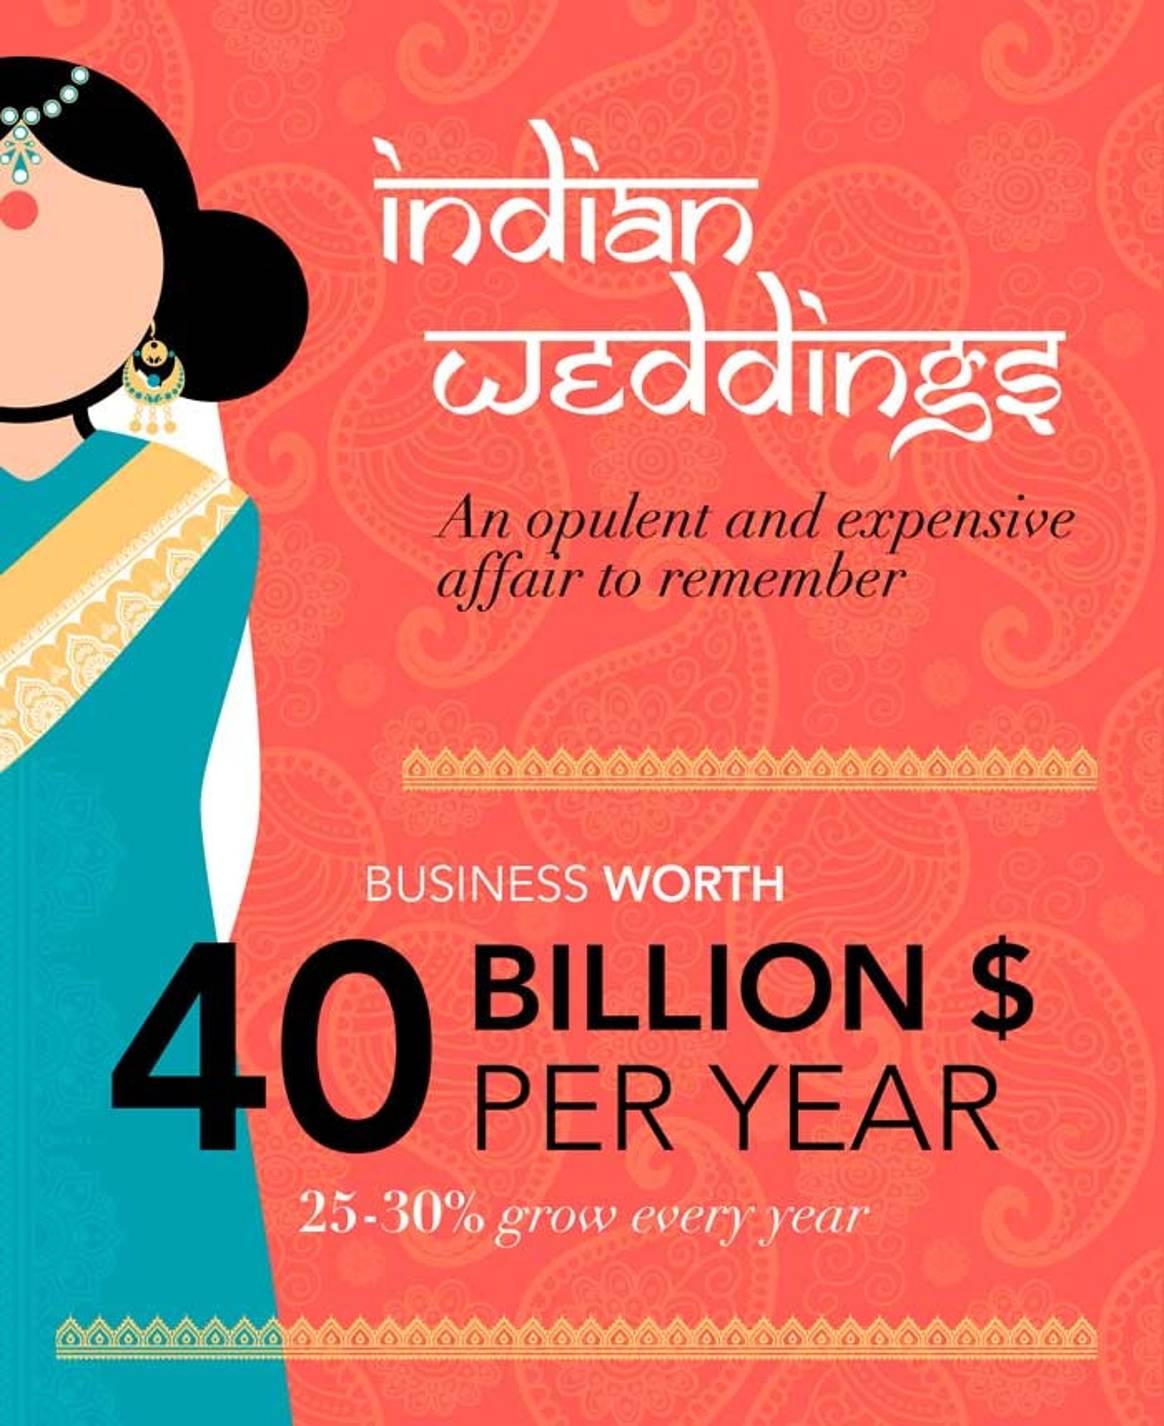 Indian weddings: An opulent and expensive affair to remember